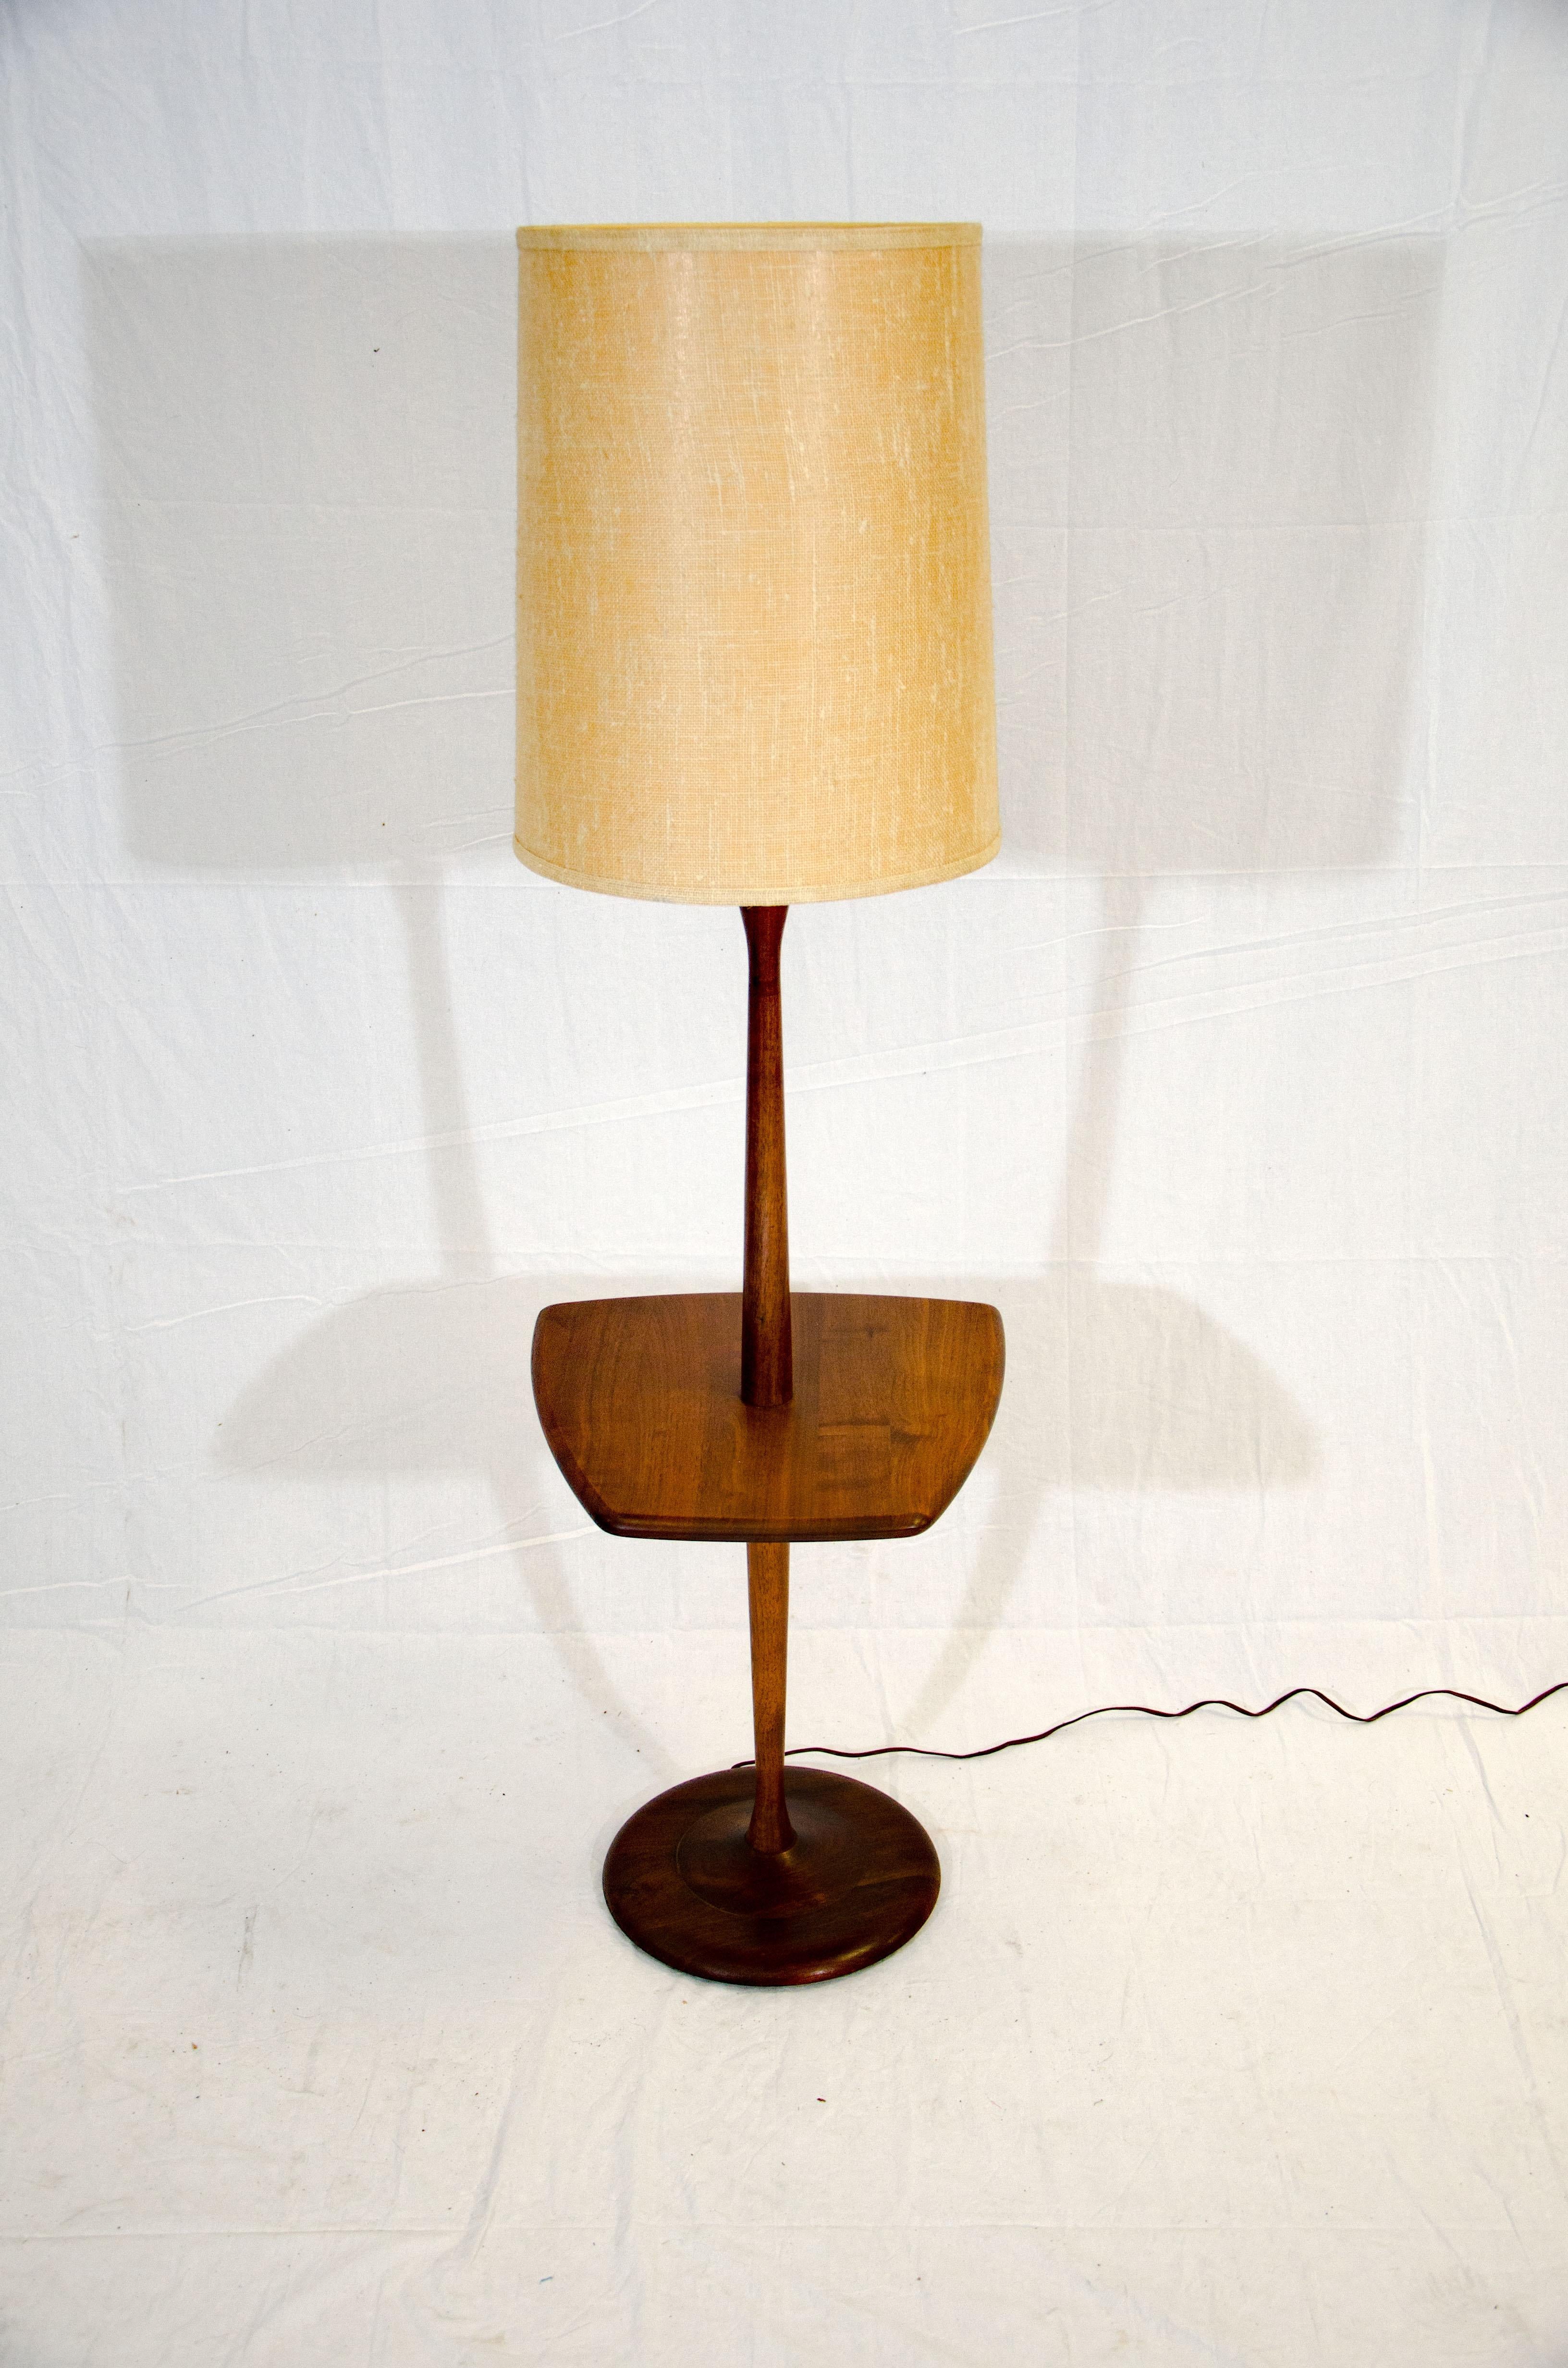 Useful Danish walnut floor lamp with a small attached beverage or magazine table that you can place next to your favorite reading chair. The small table measures 21 3/4